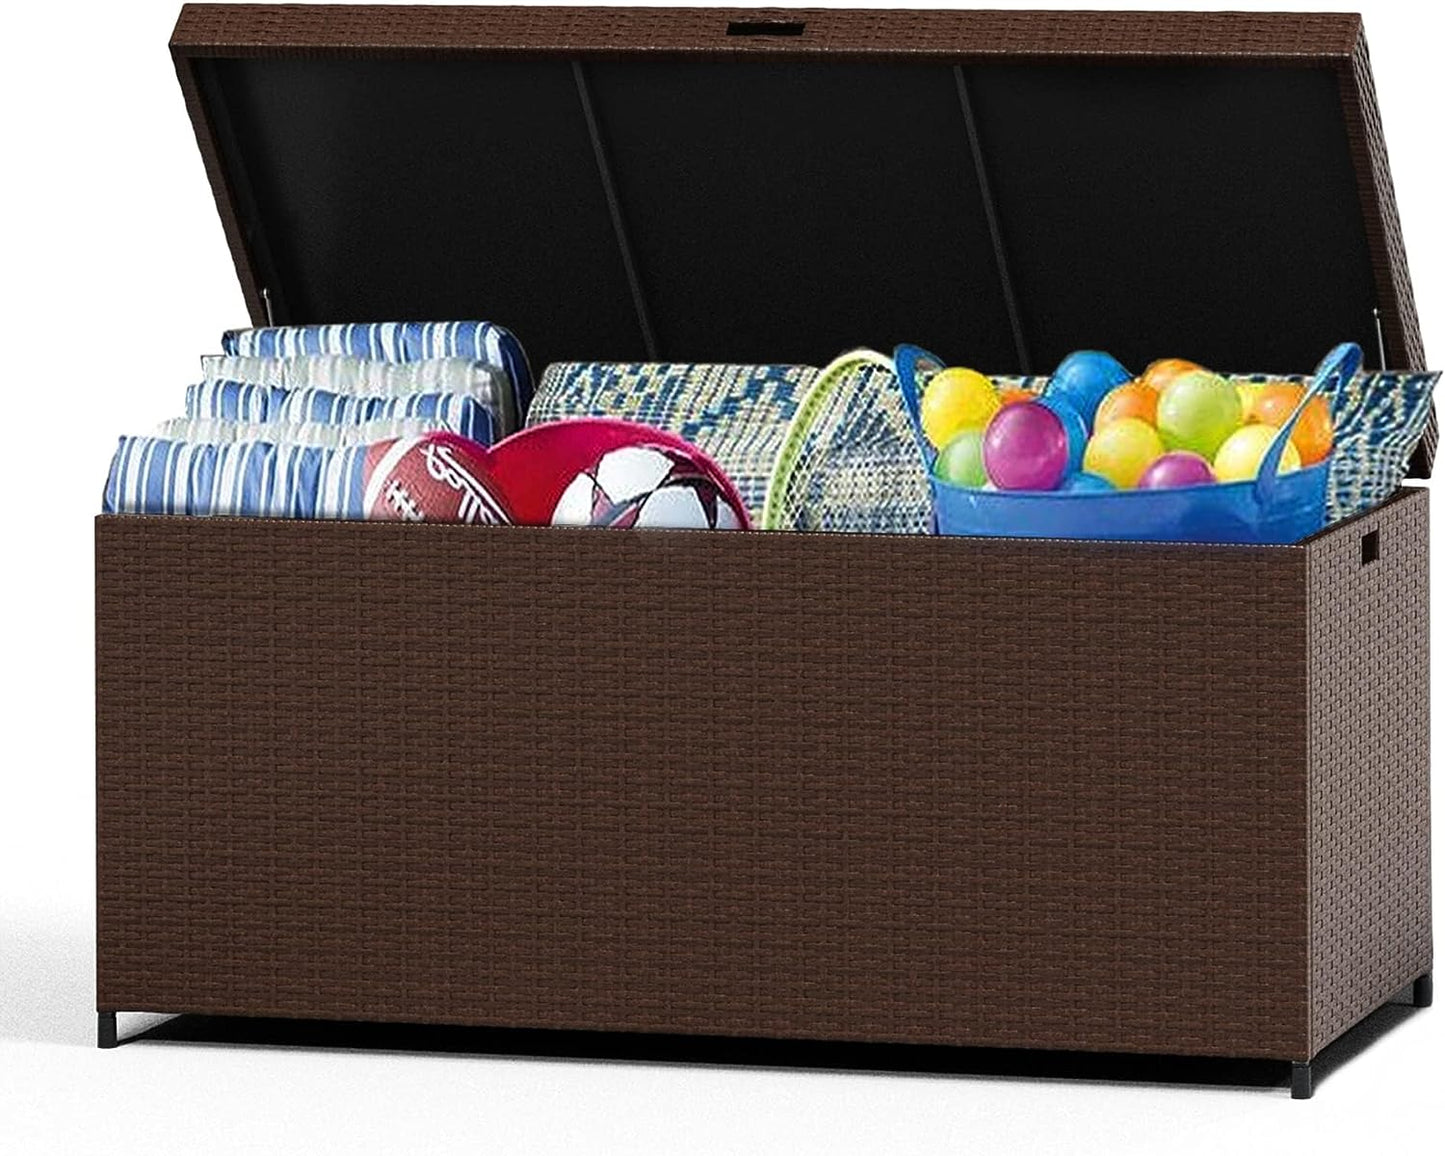 SUNVIVI OUTDOOR Large Patio Storage Box with Waterproof Inner, 140 Gallon Outdoor Wicker Storage Bin for Cushions, Garden Tools, Pool Toys, Aluminum Frame, Brown